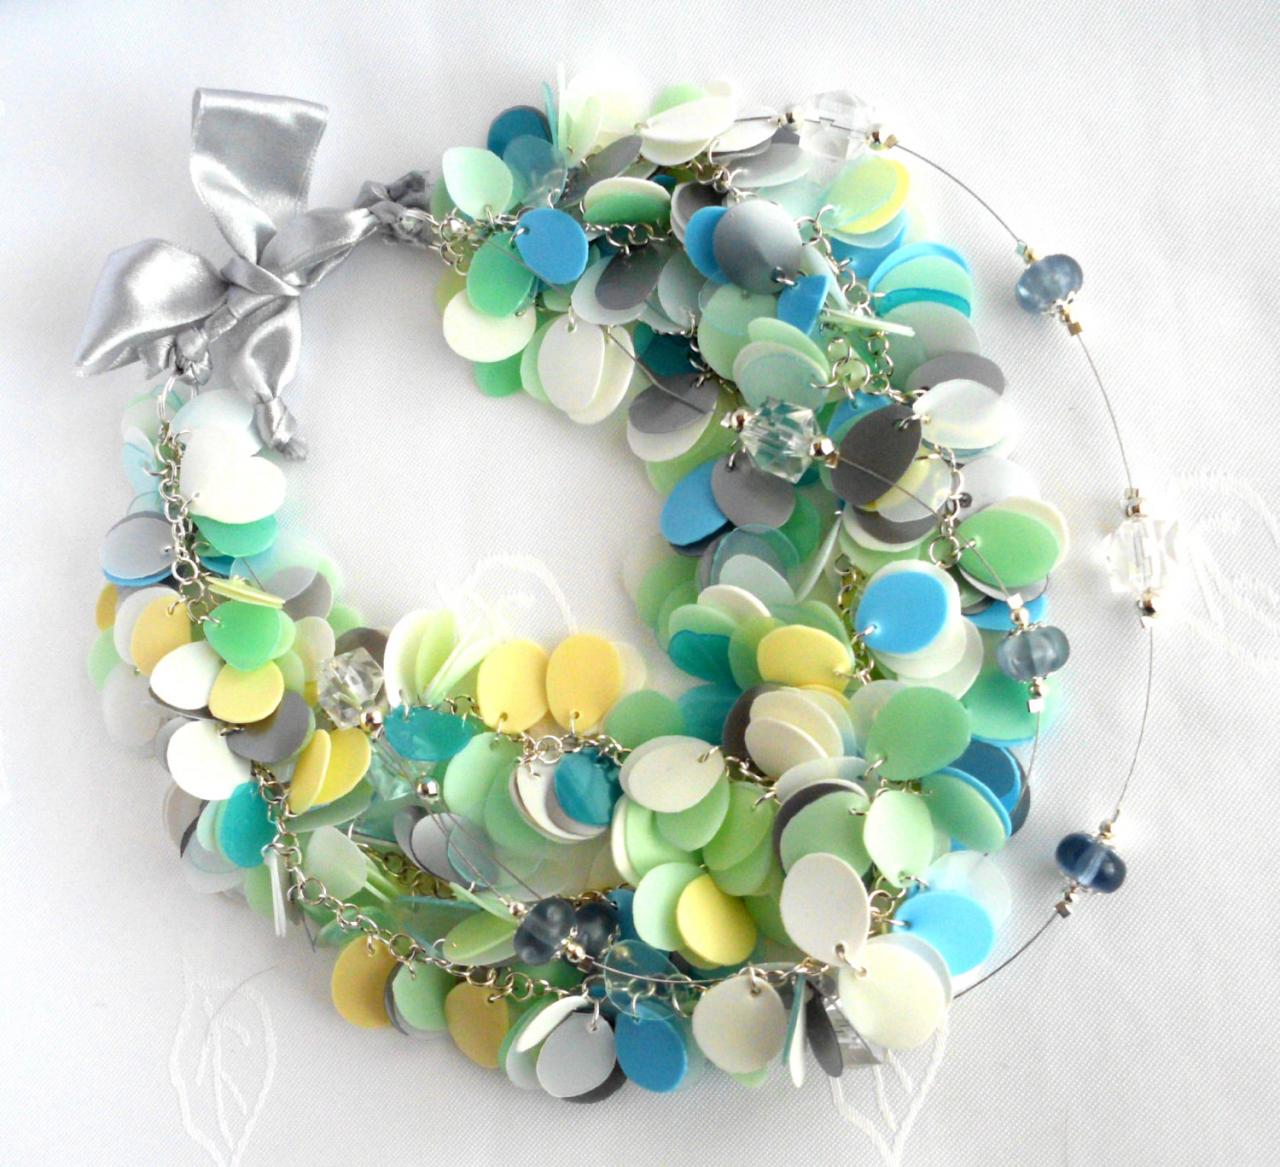 Blue Green White Pastel Statement Necklace Made Of Recycled Plastic Bottles & Silver Ribbon, Upcycled Jewelry, Eco-friendly